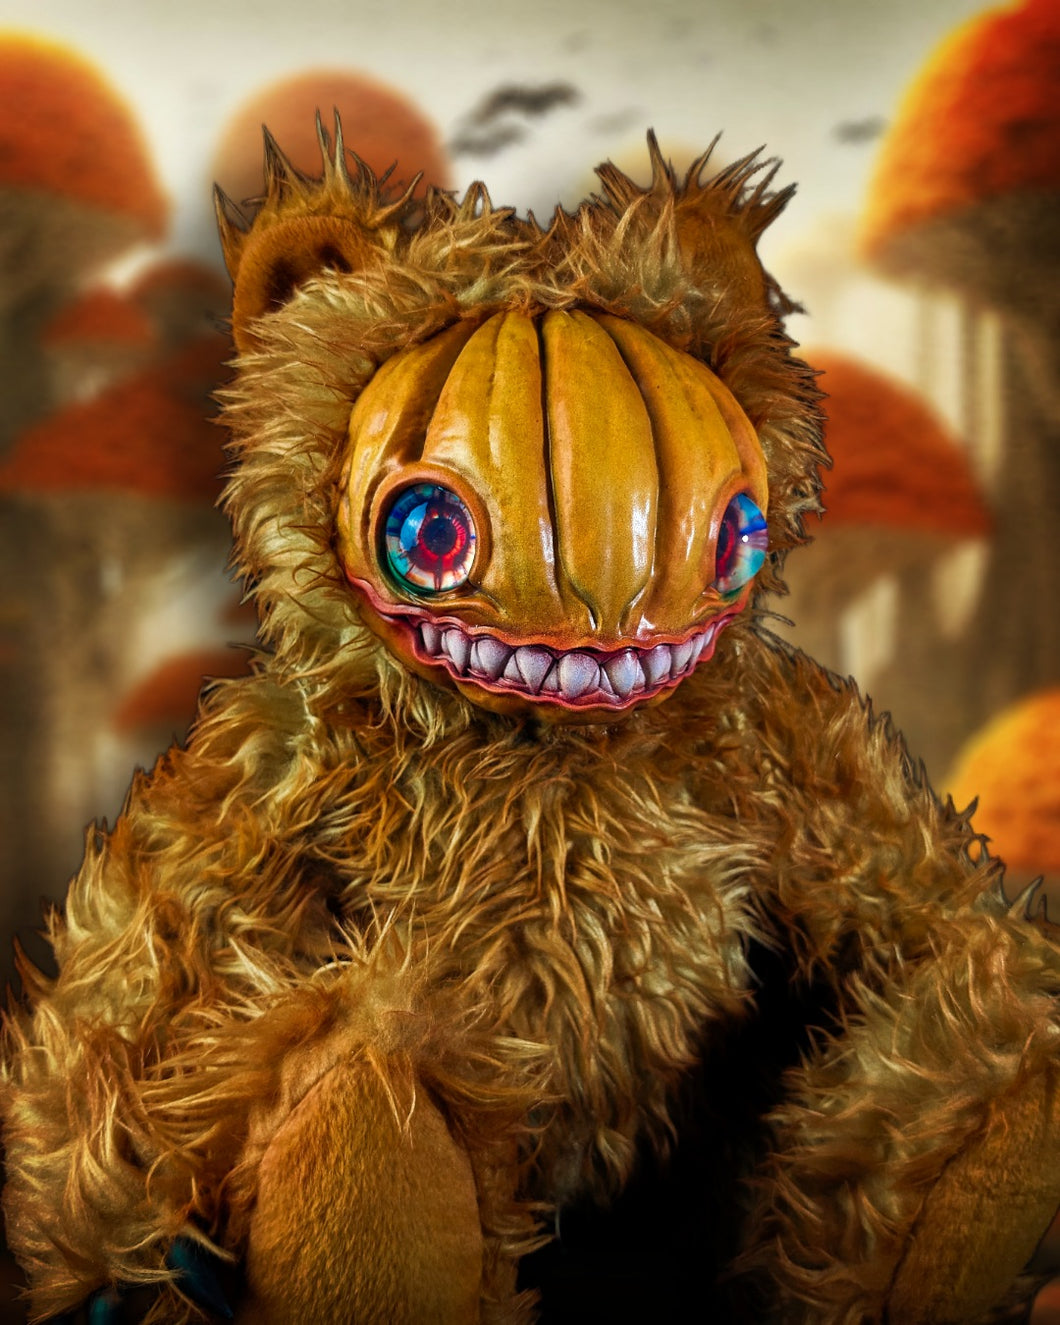 Loathsome Lantern: HAUNTVESTER - CRYPTCRITZ Handcrafted Creepy Cute Halloween Pumpkin Art Doll Plush Toy for Spooky Souls